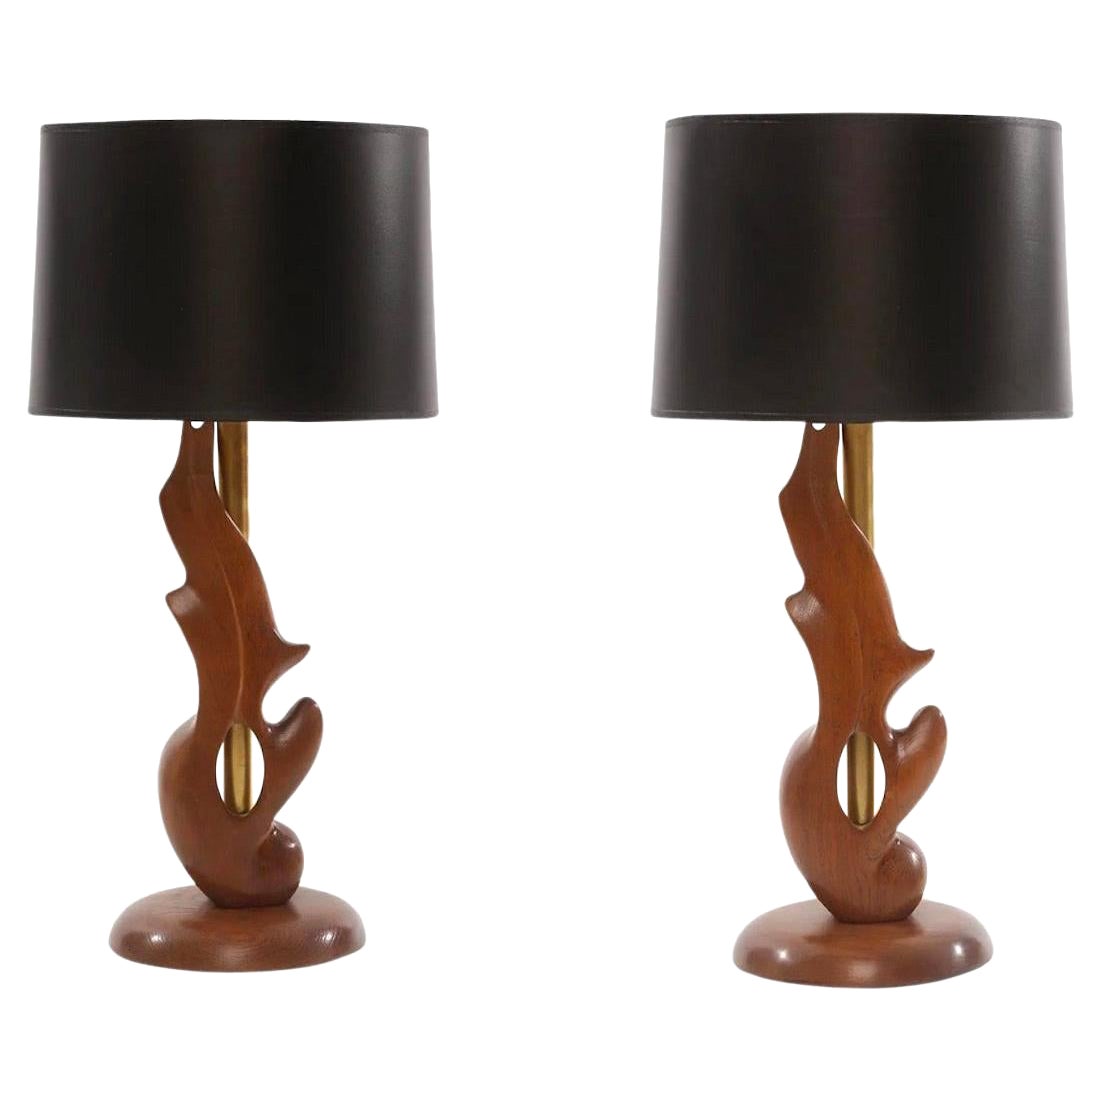 Heifetz Sculptural 1950s Oak and Brass Table Lamps For Sale